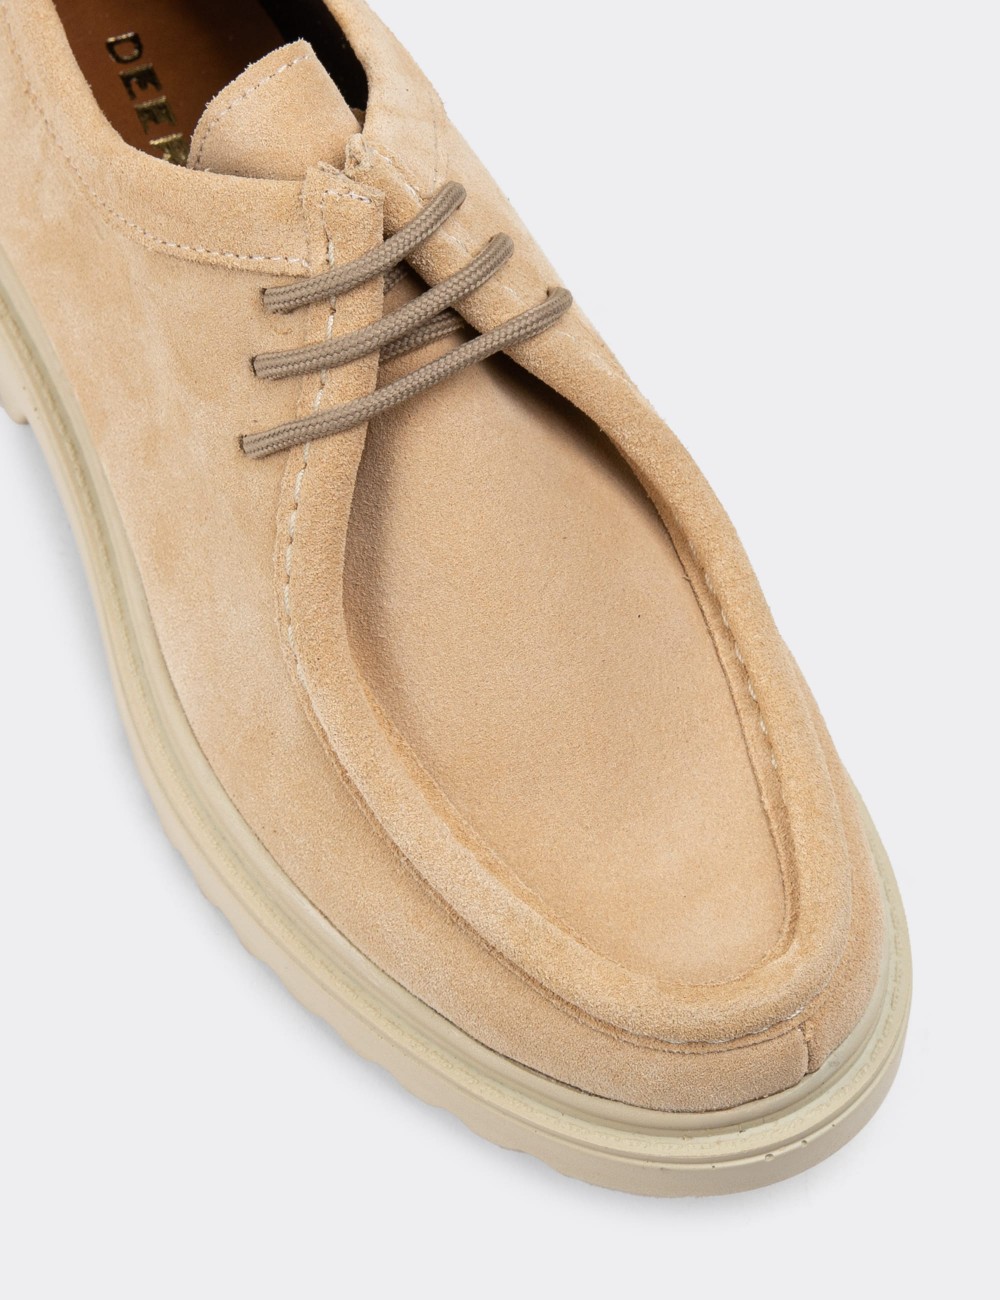 Beige Suede Leather Lace-up Shoes - 01935ZBEJC02